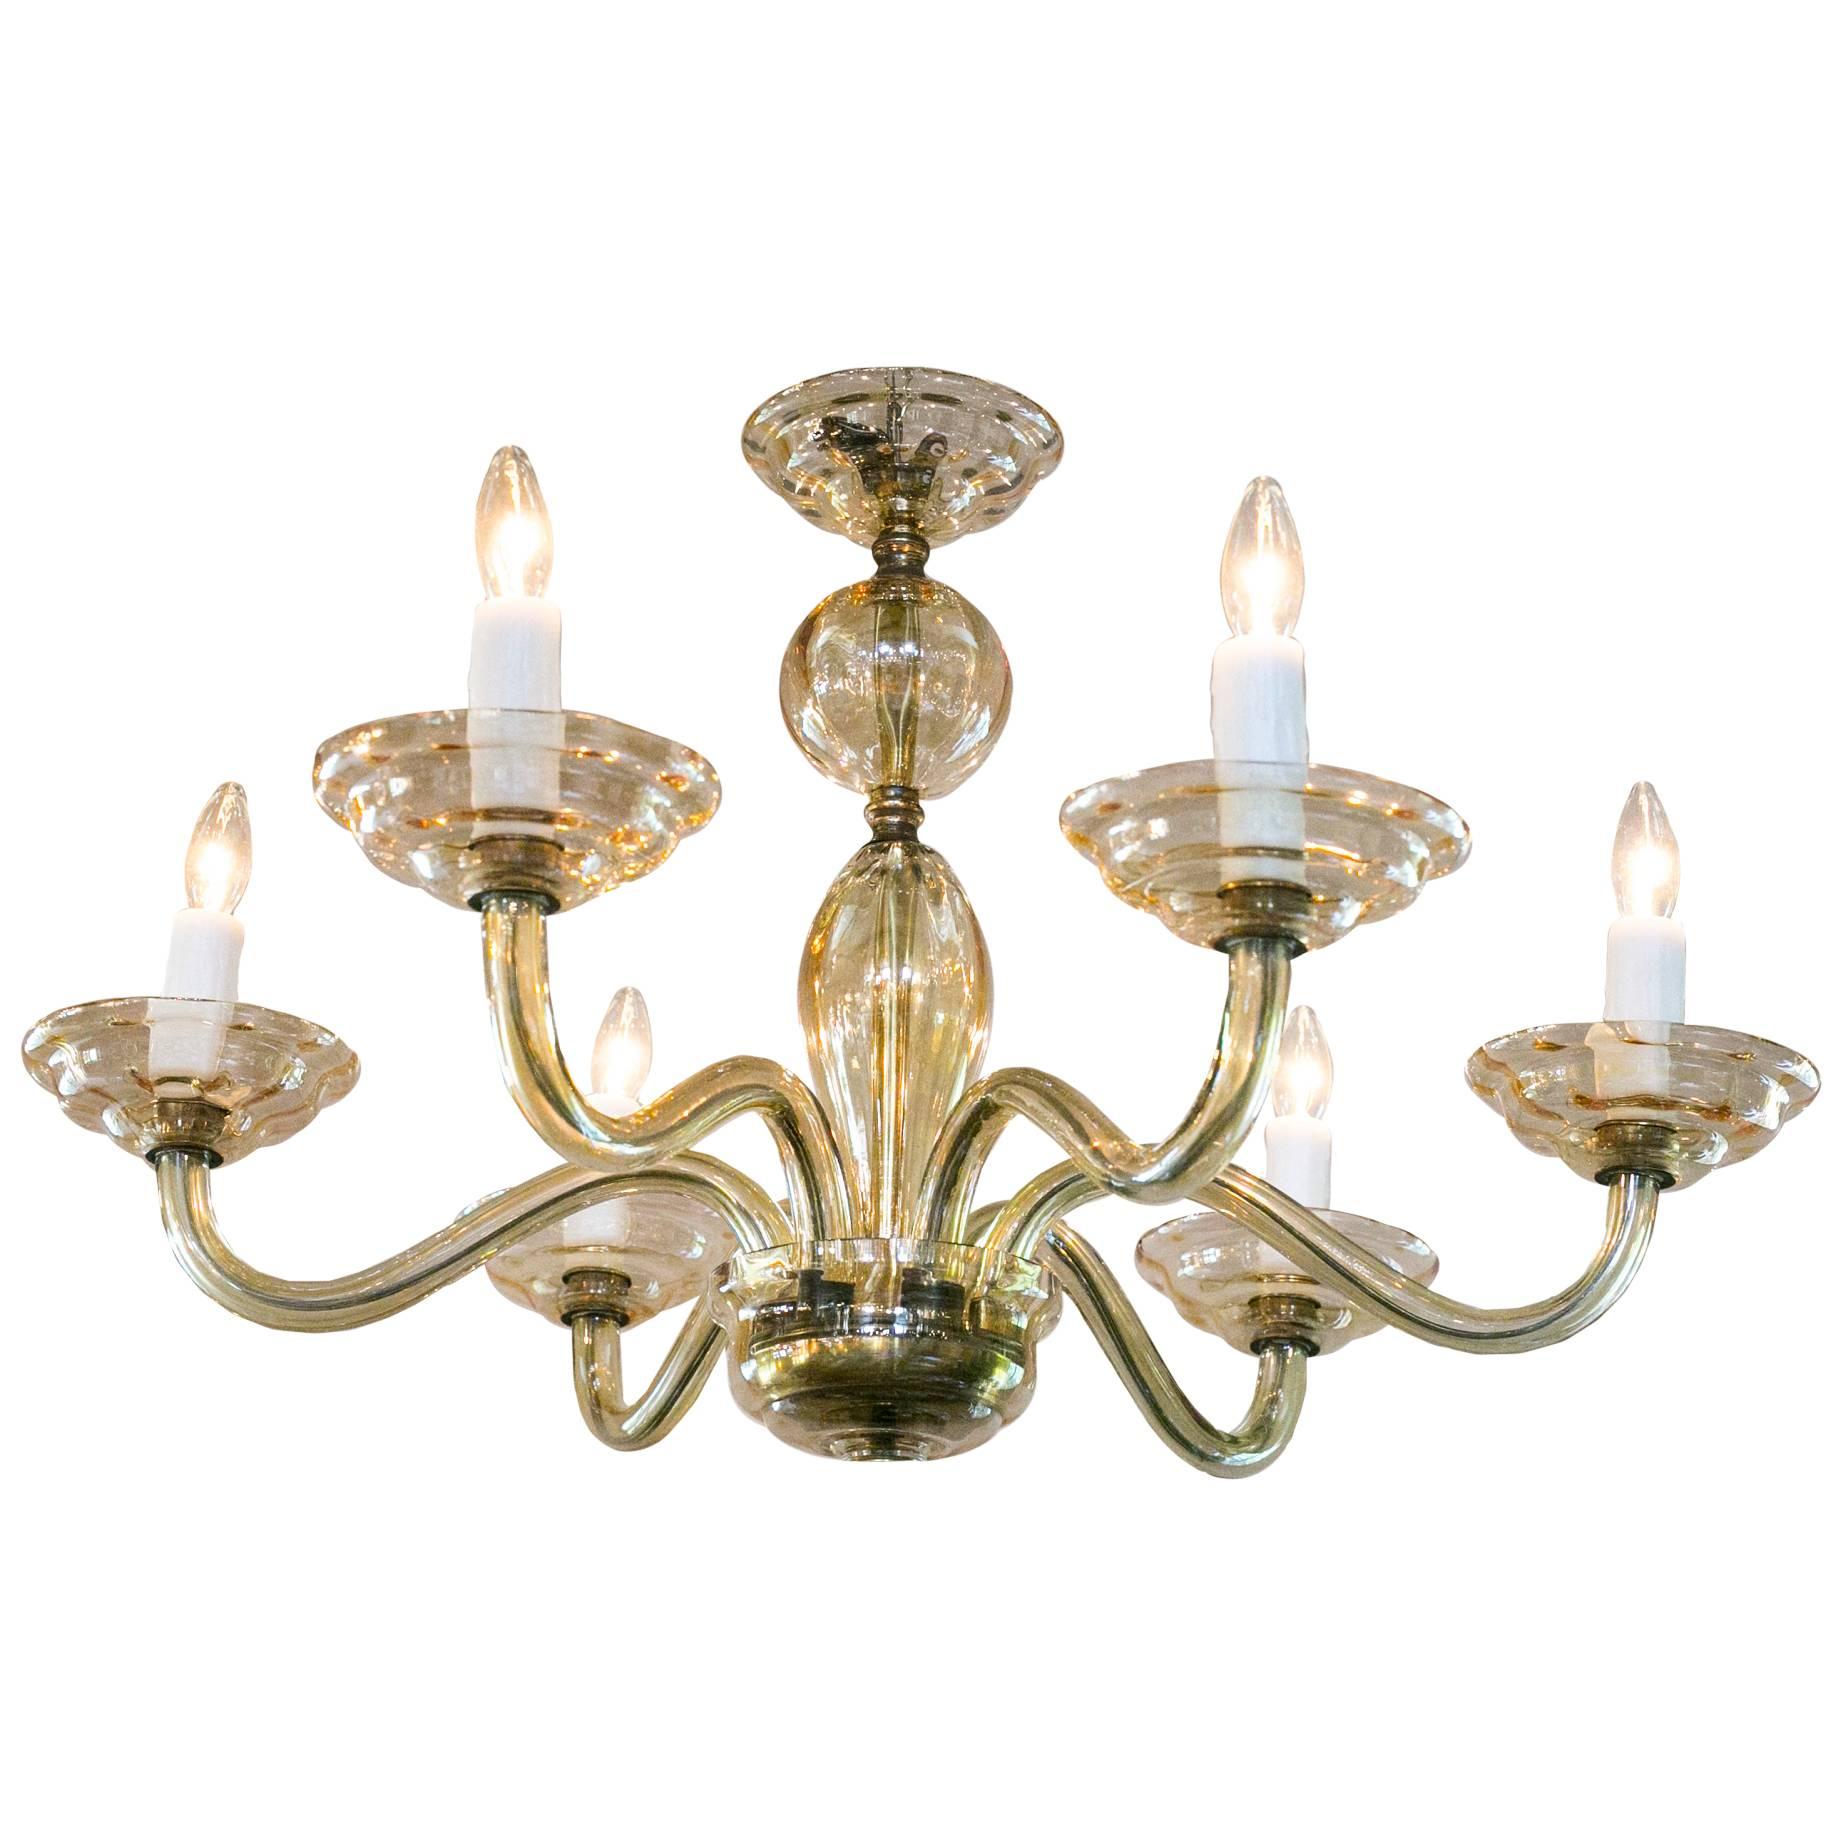 Vintage Champagne Colored Murano Glass Chandelier with Six Arms